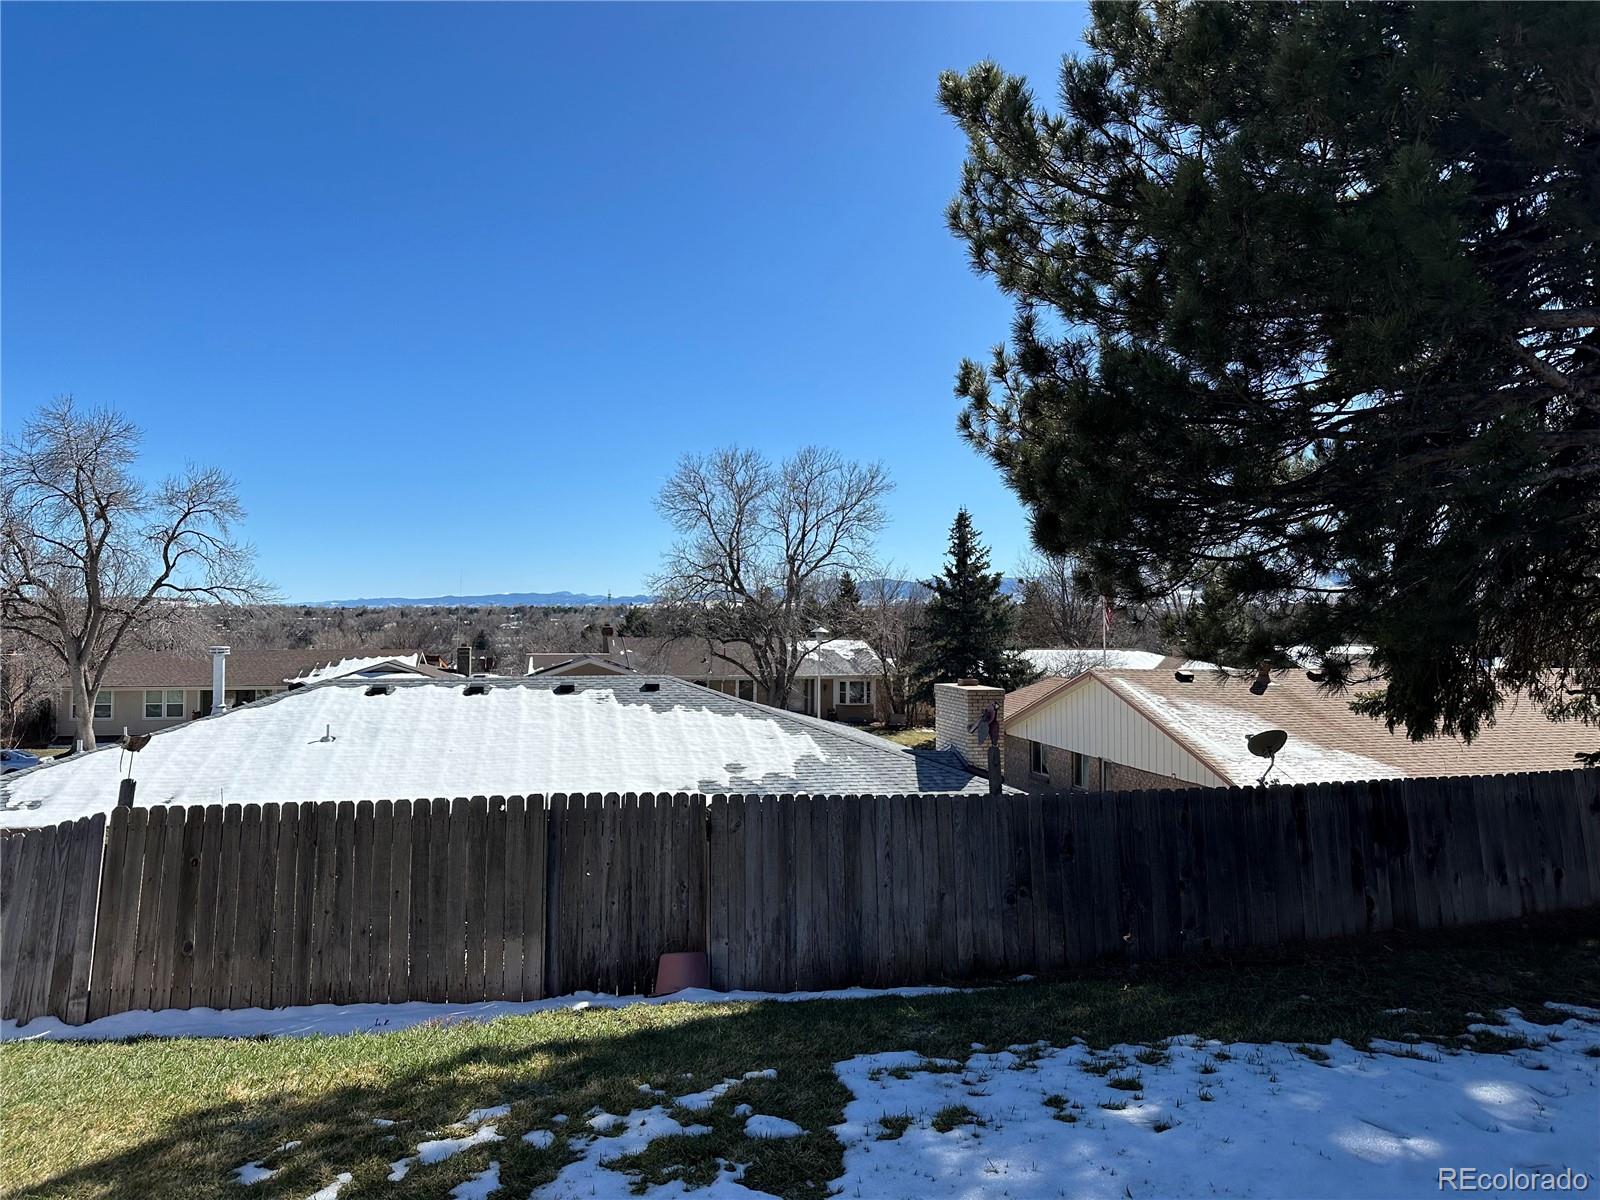 CMA Image for 2340 s garland court,Lakewood, Colorado